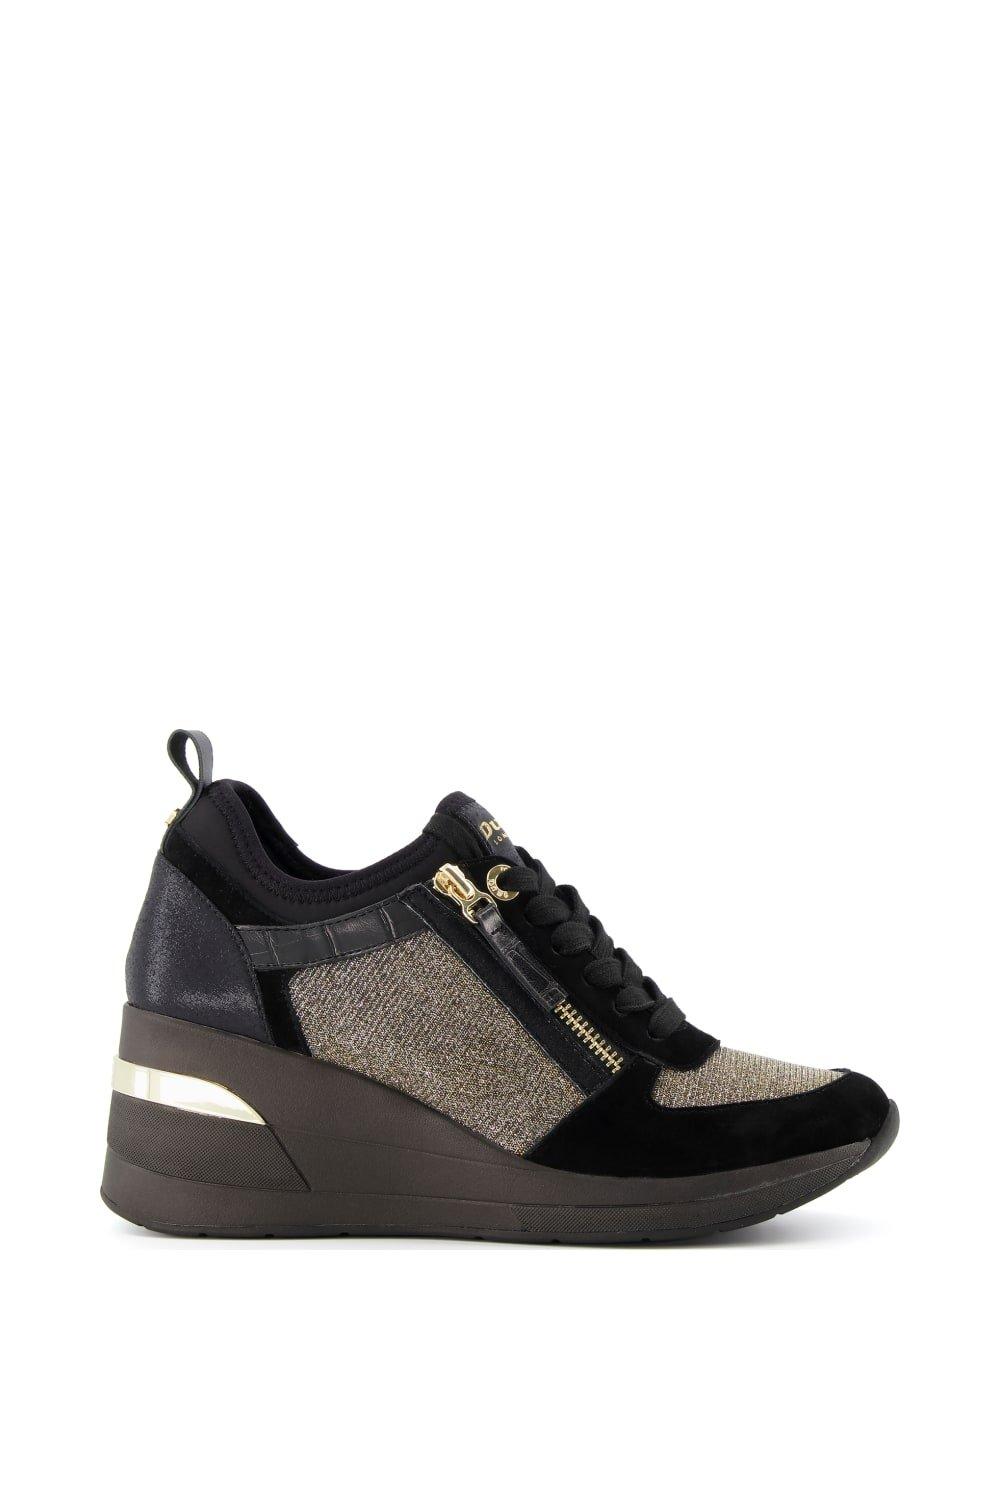 Trainers | 'Eilin' Leather Trainers | Dune London